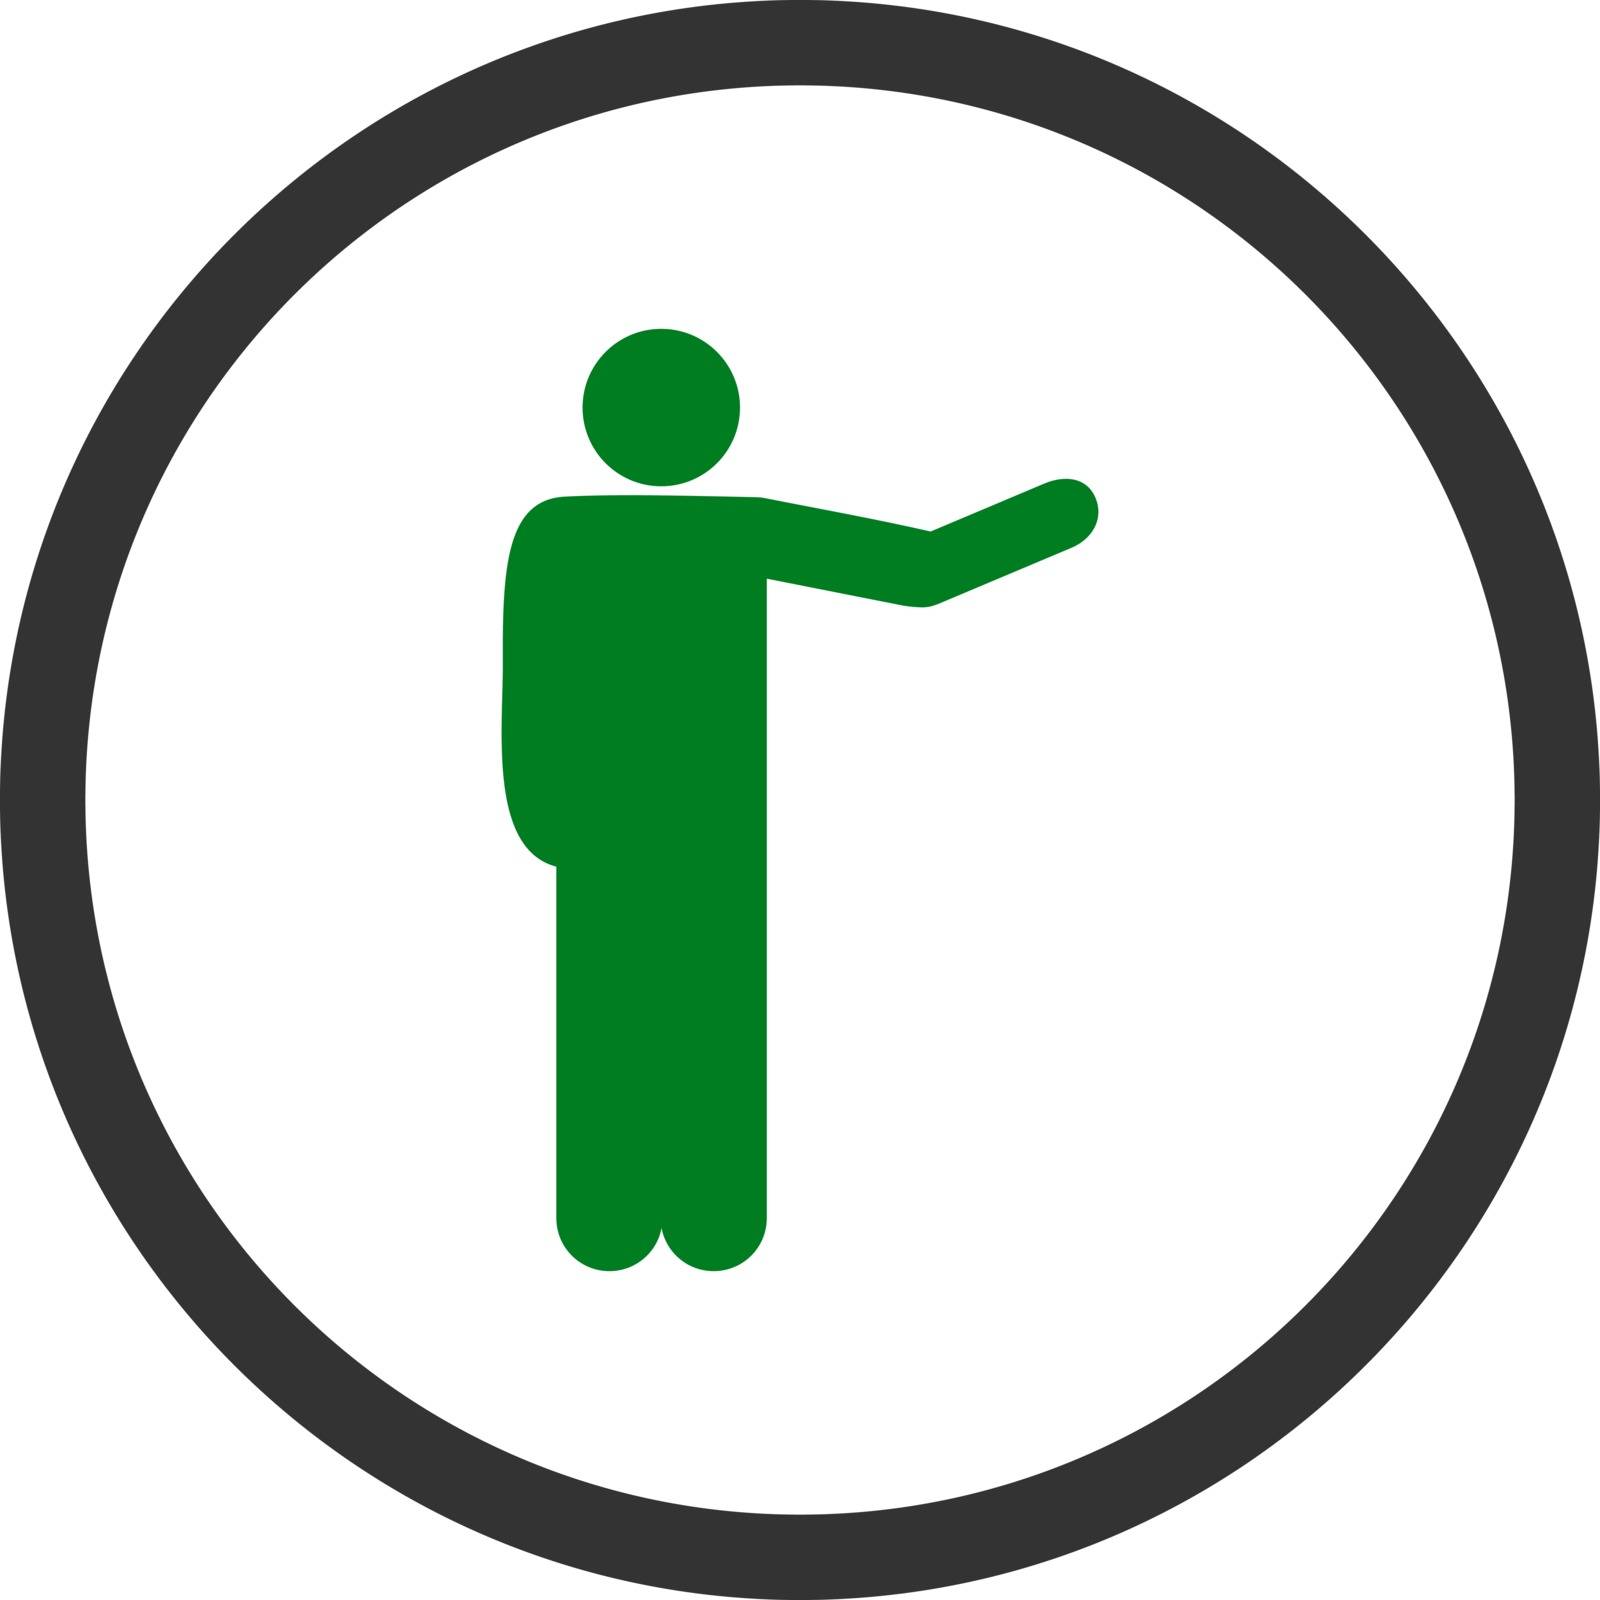 Show vector icon. This rounded flat symbol is drawn with green and gray colors on a white background.